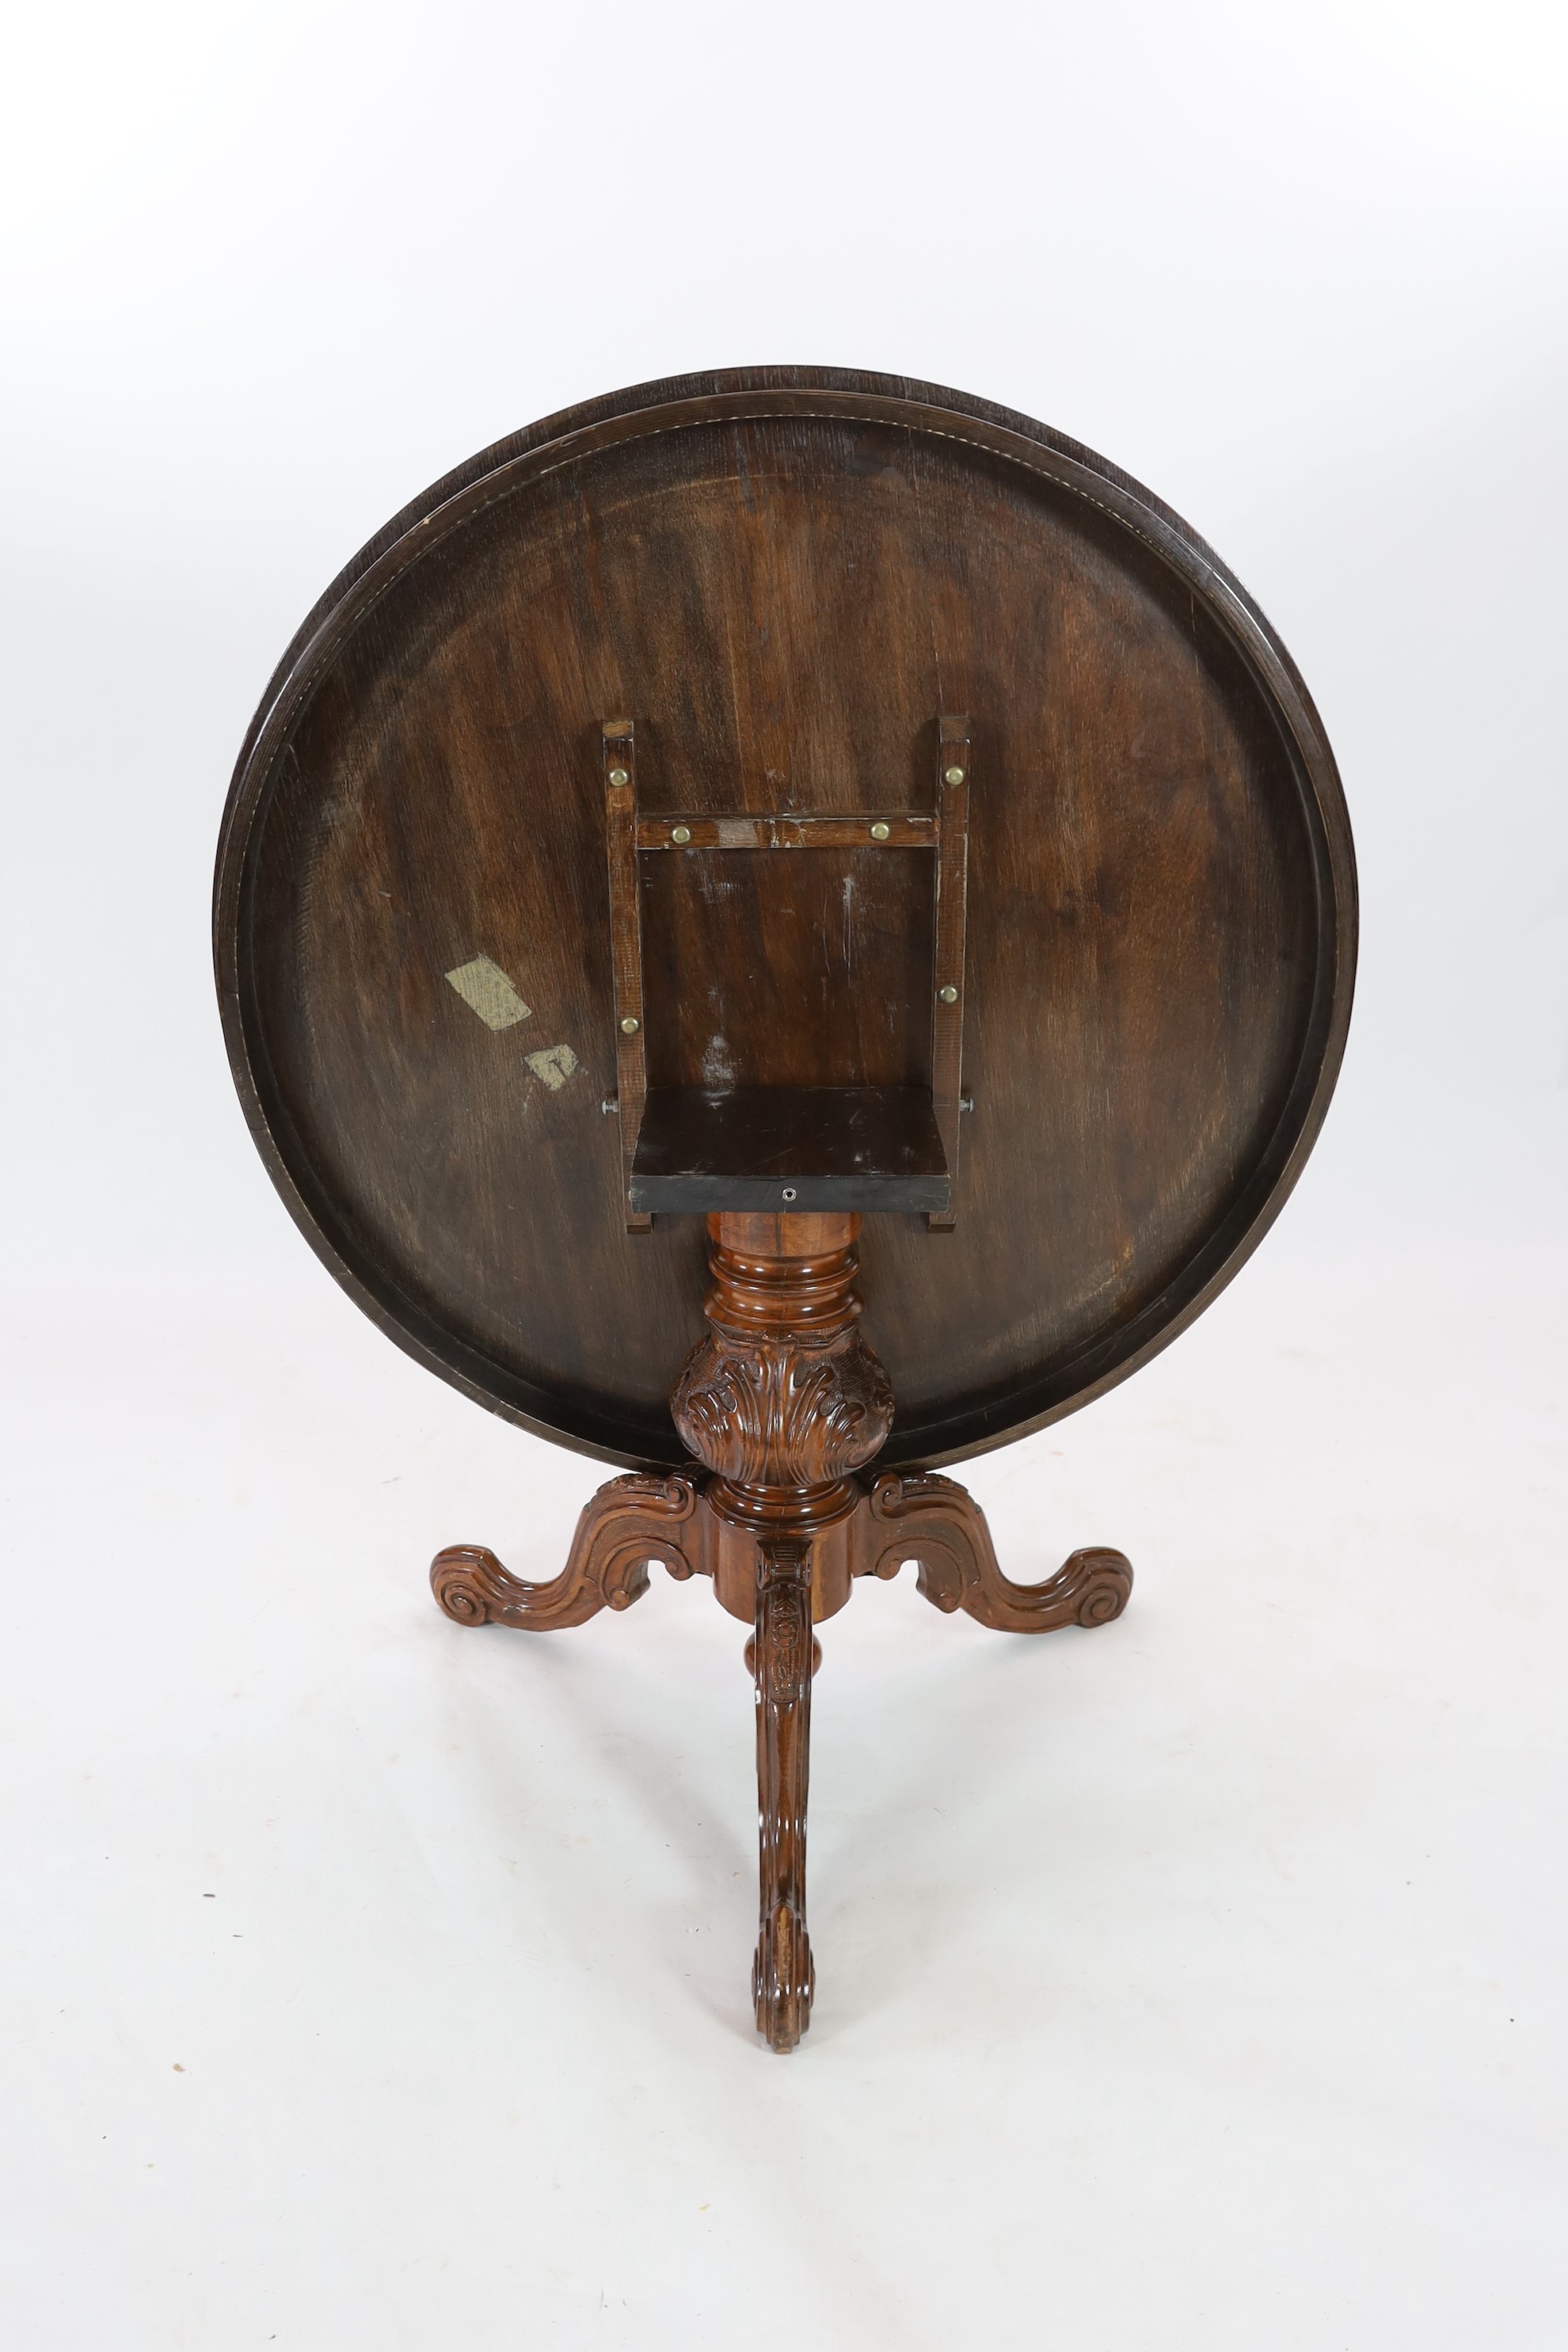 A Victorian-style walnut and marquetry breakfast table Diameter 129 cm. Height 80 cm.